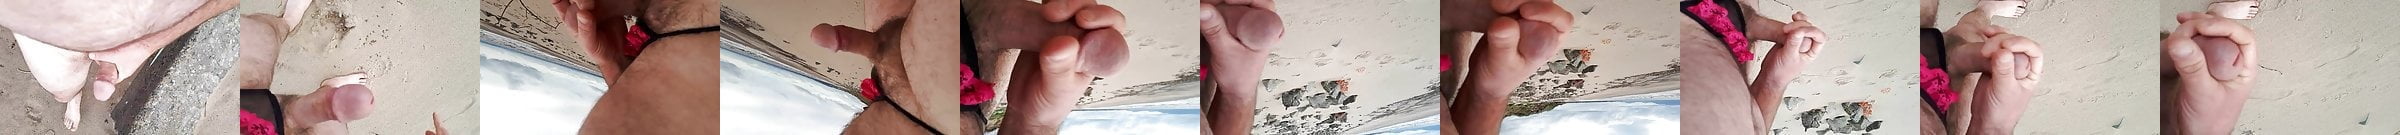 Wanking At The Nude Beach Free Gay Anal Porn 4d Xhamster Xhamster